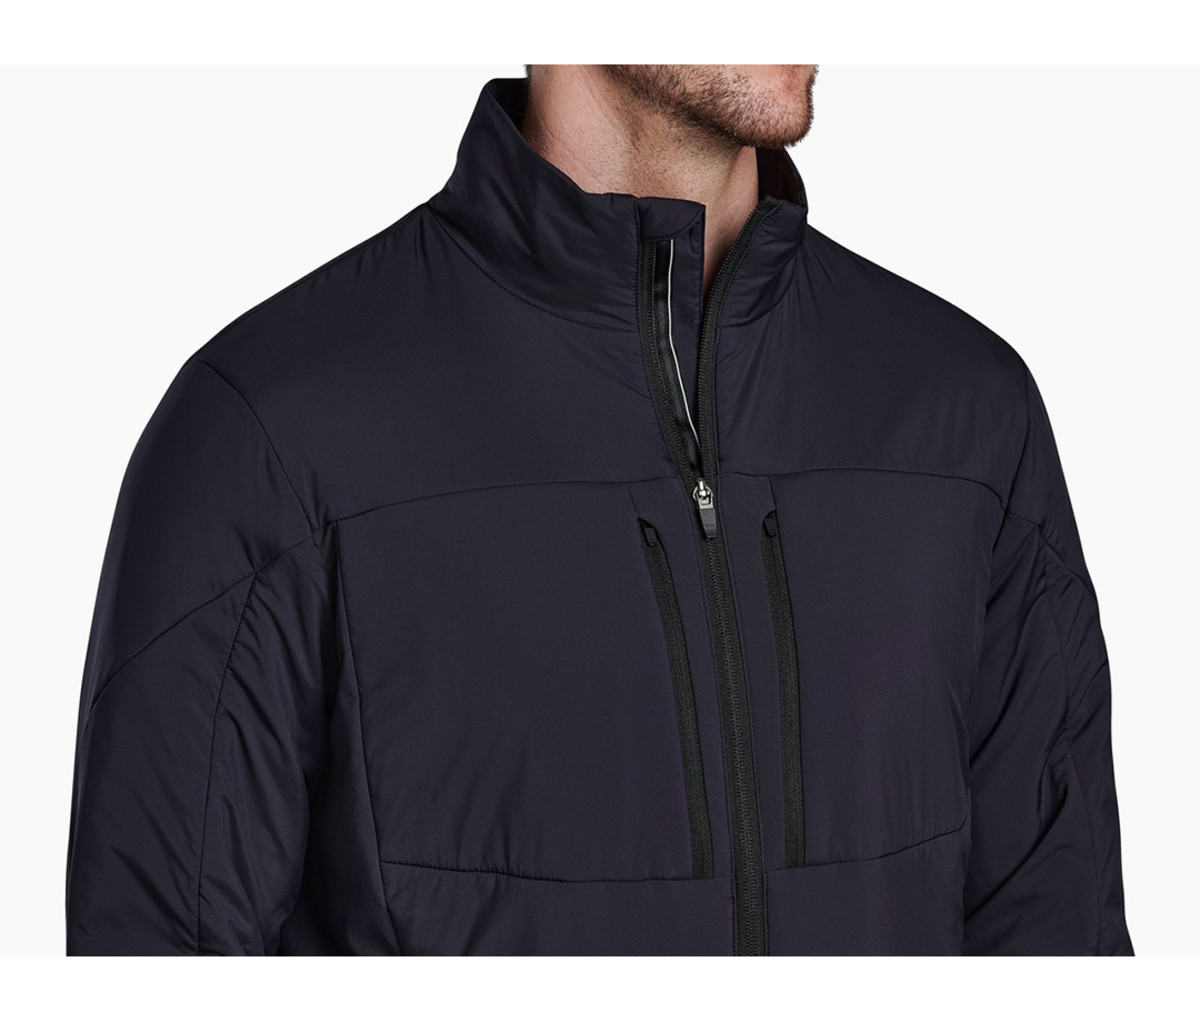 Head to the Office This Winter in the Aktivator Jacket From KÜHL - Men ...